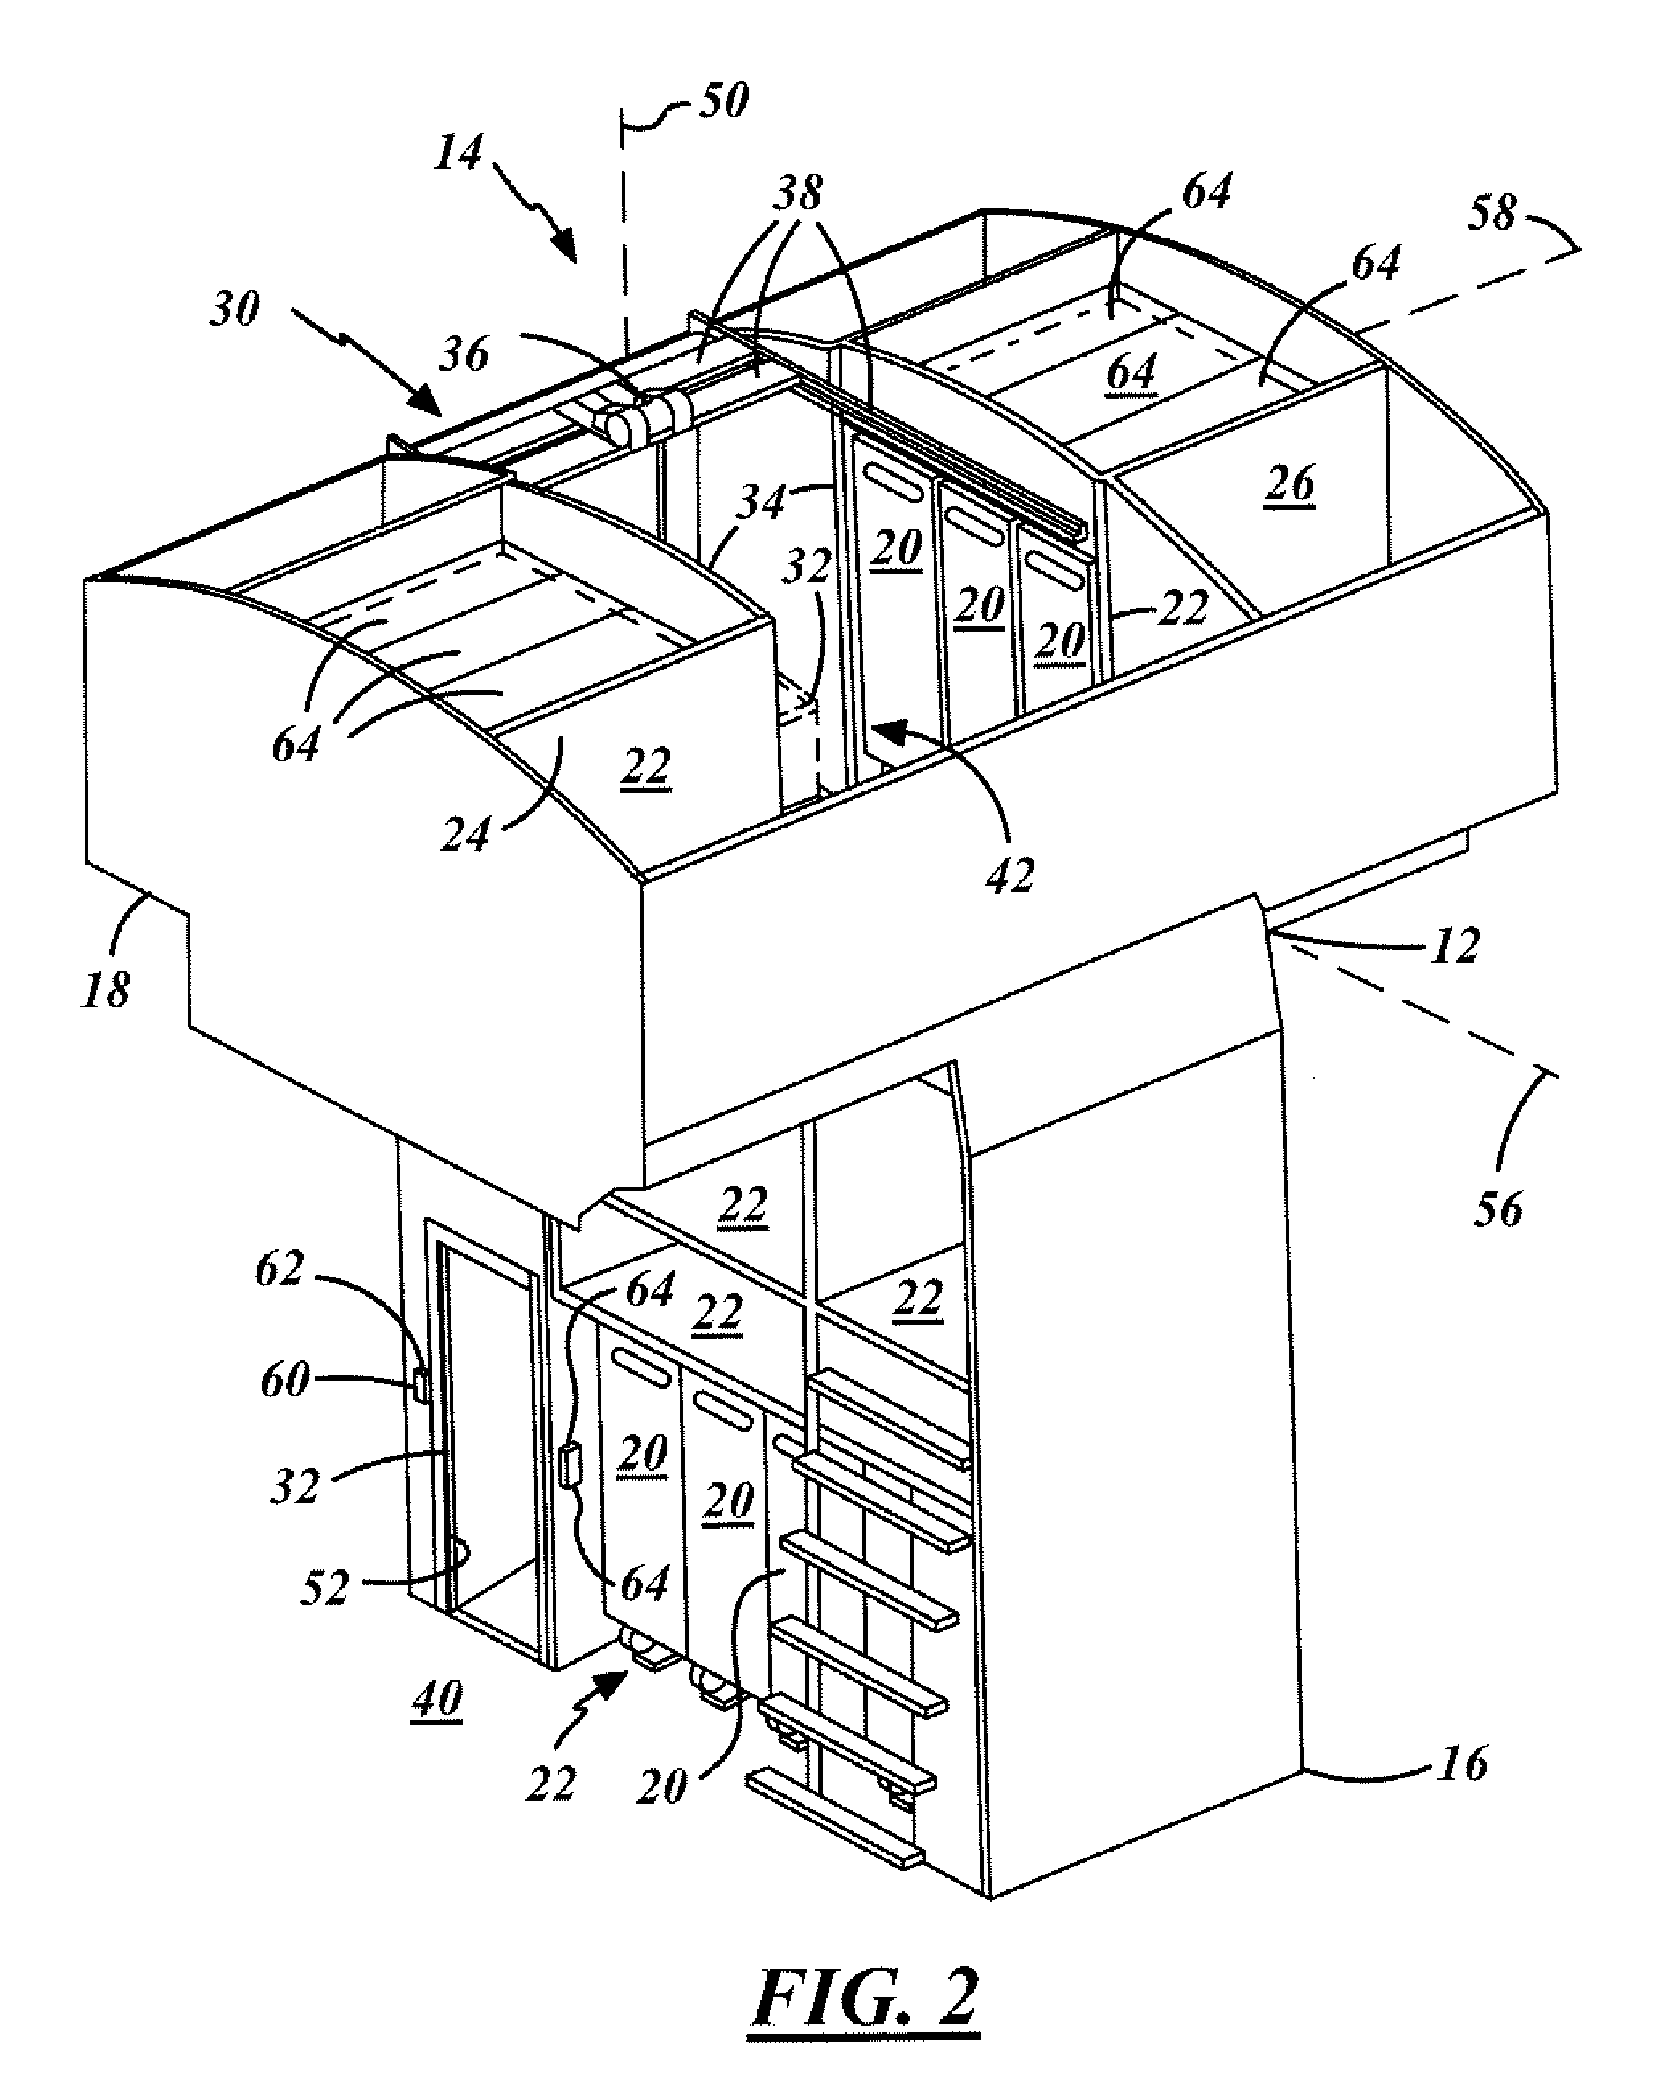 Aircraft cart transport and stowage system